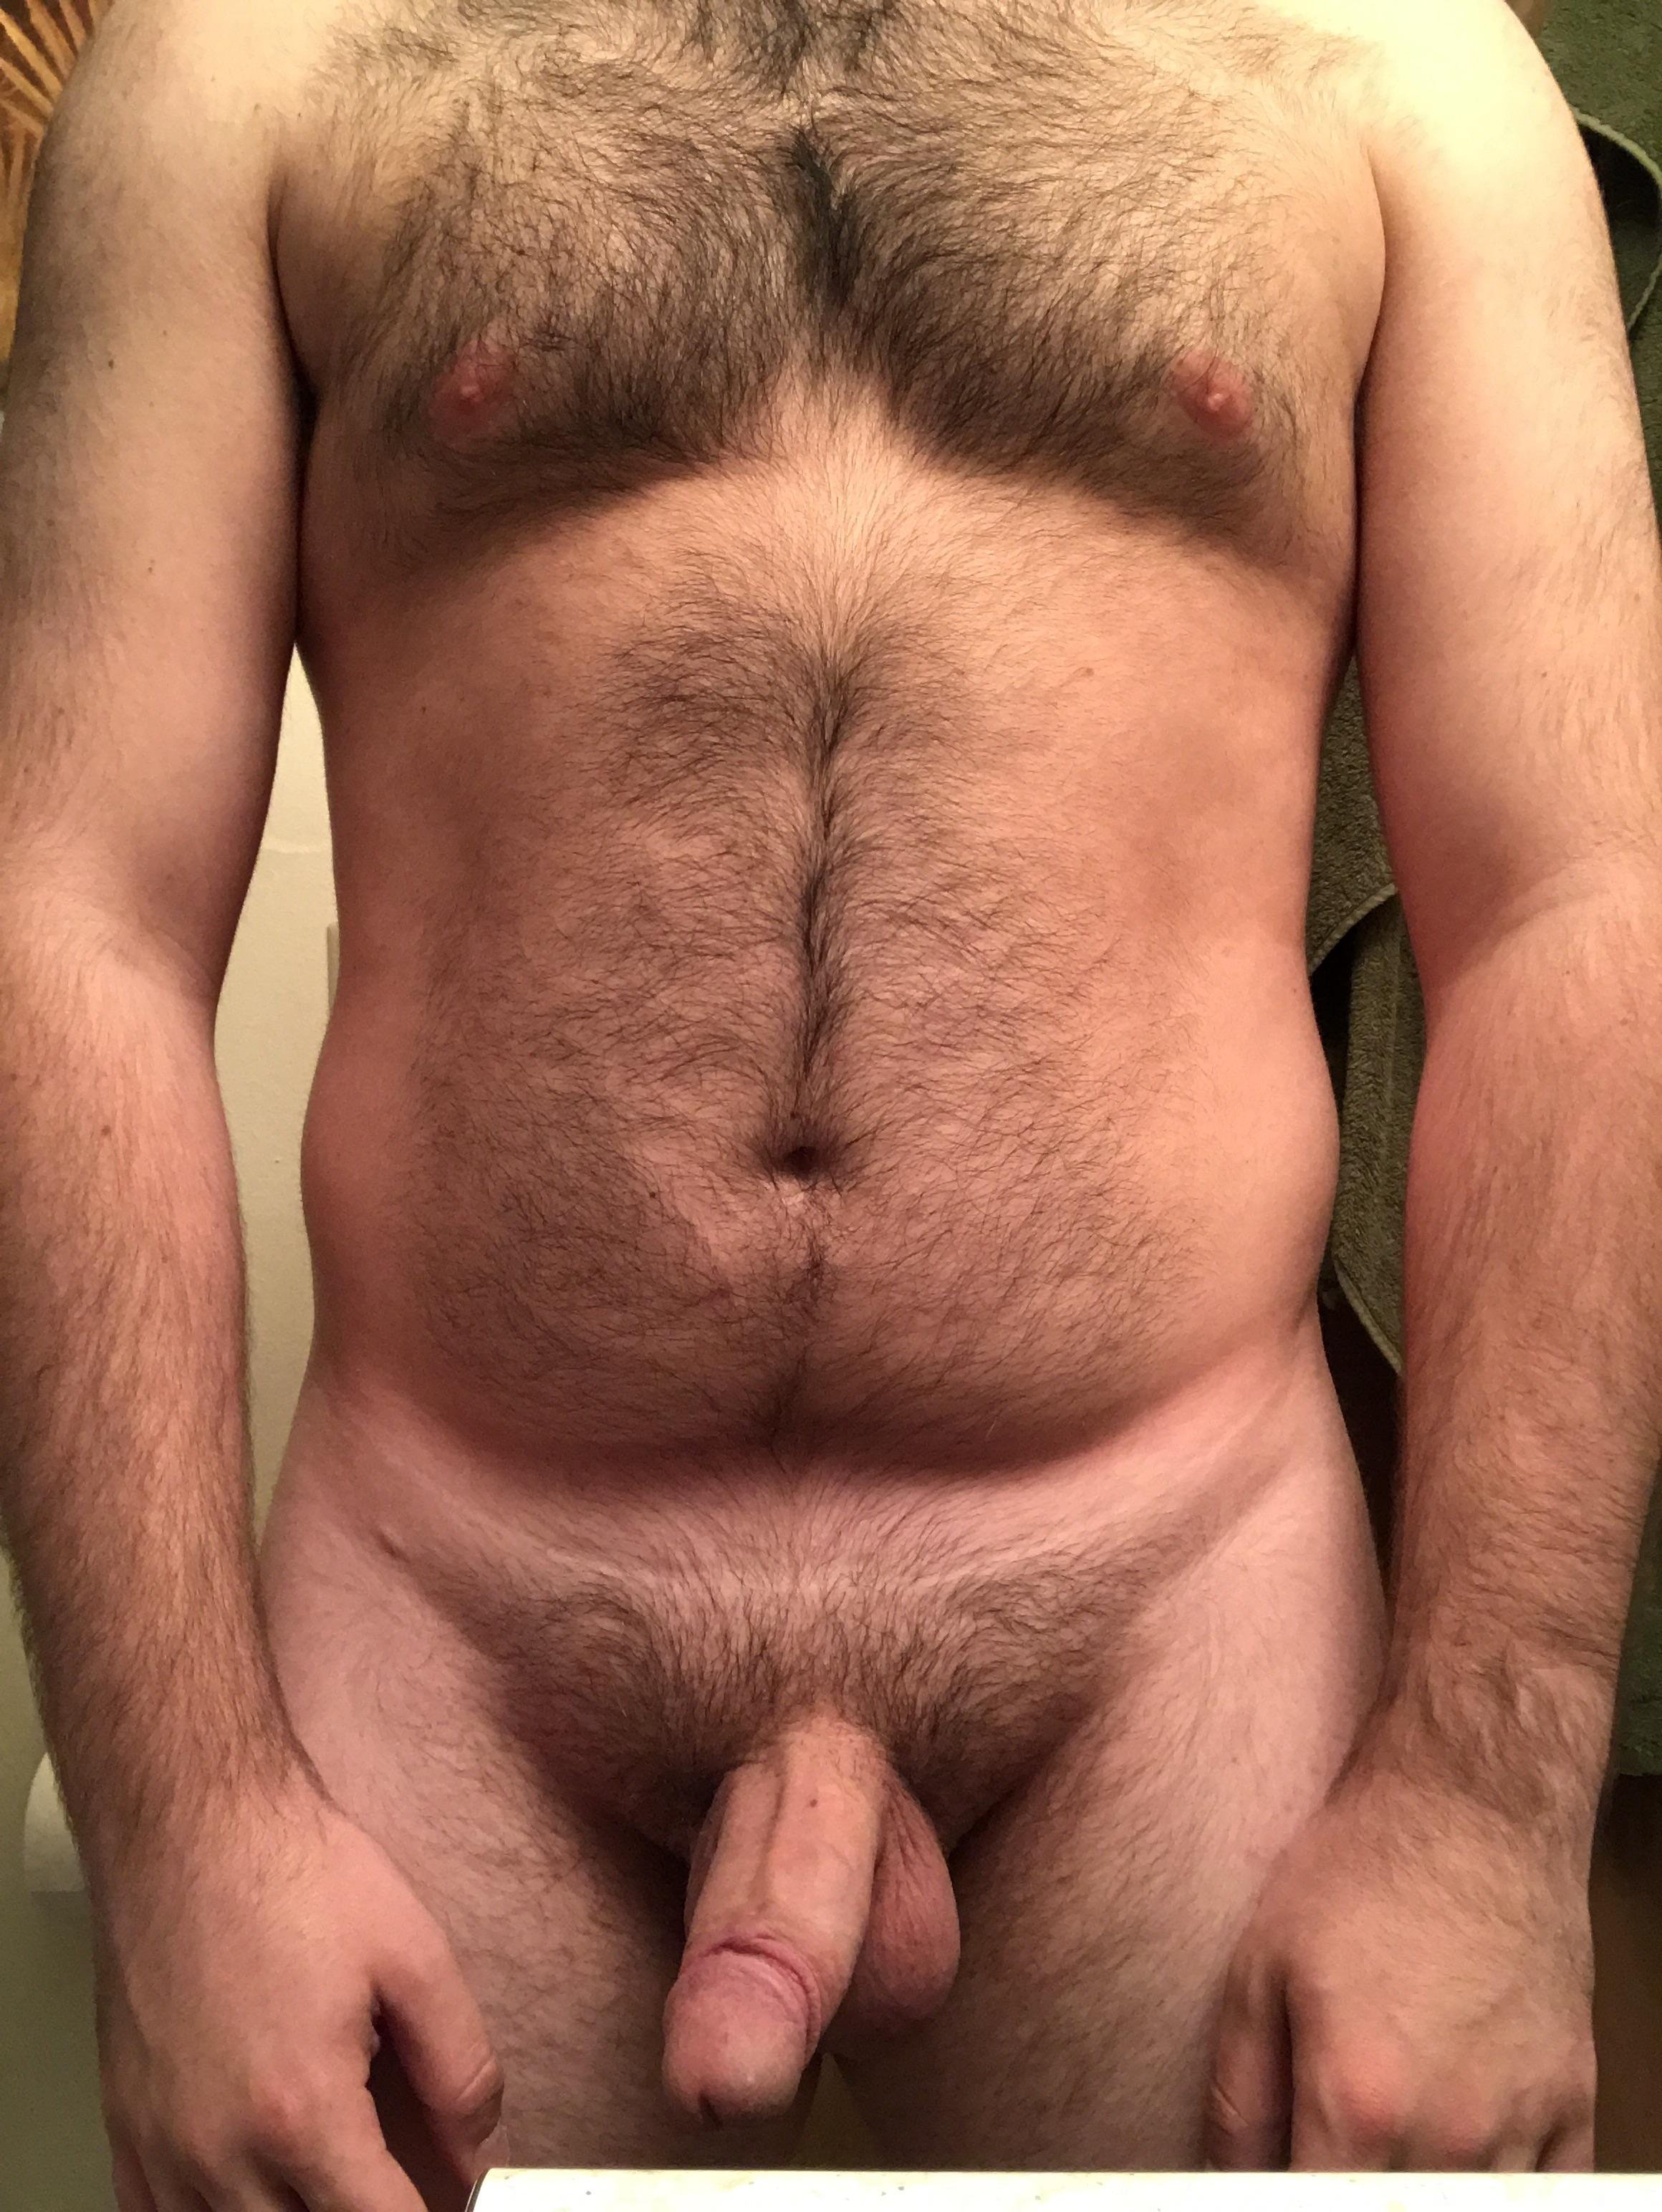 Been a while. How are all my fellow bears?